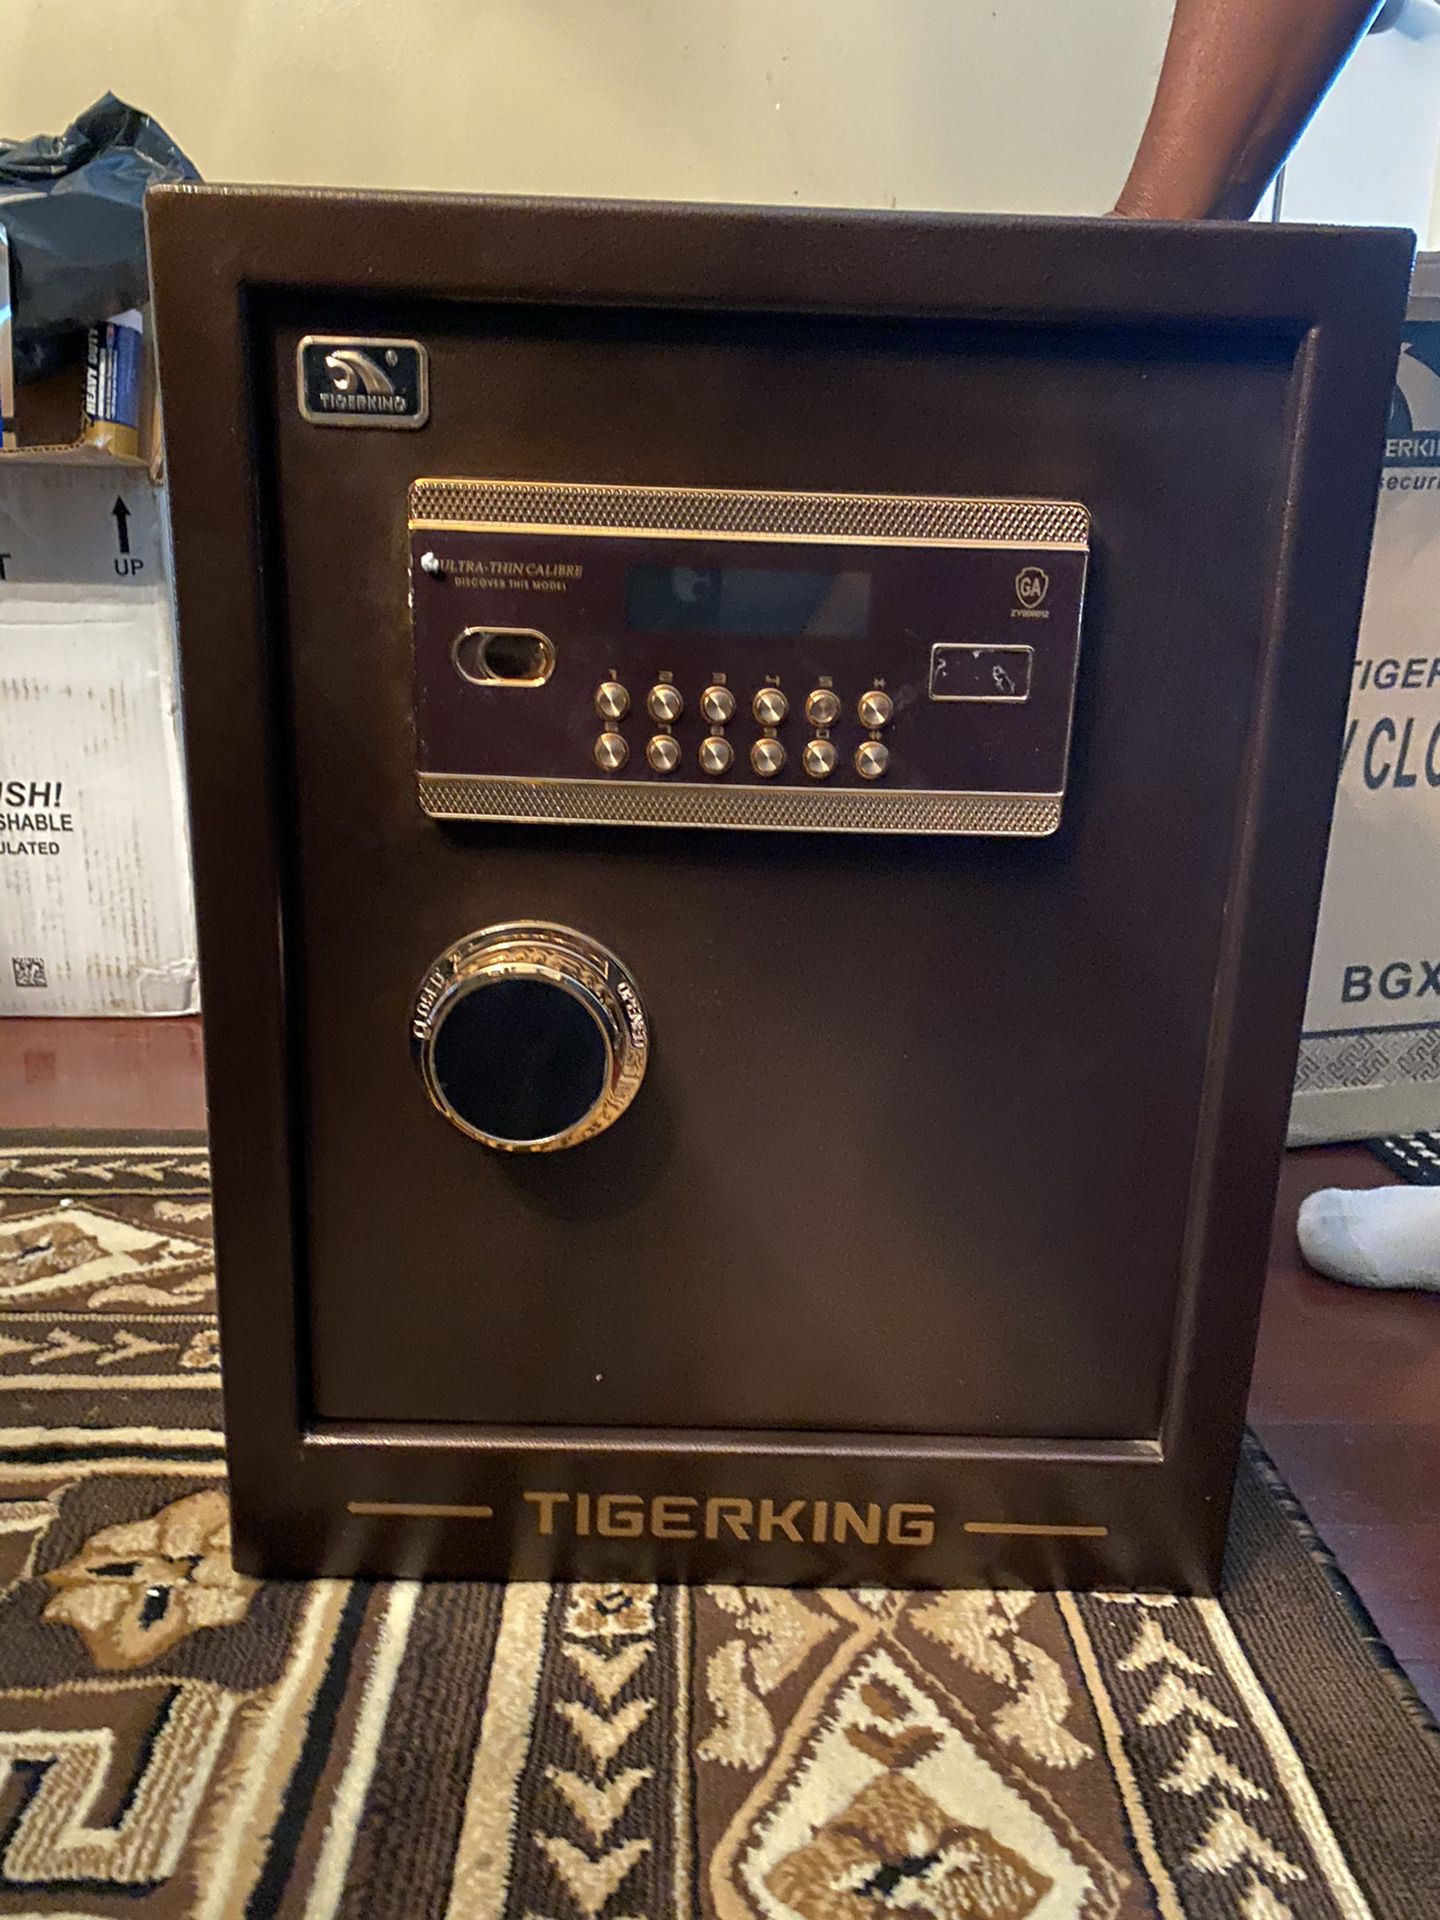 ElectronicDeluxe Digital Security Safe